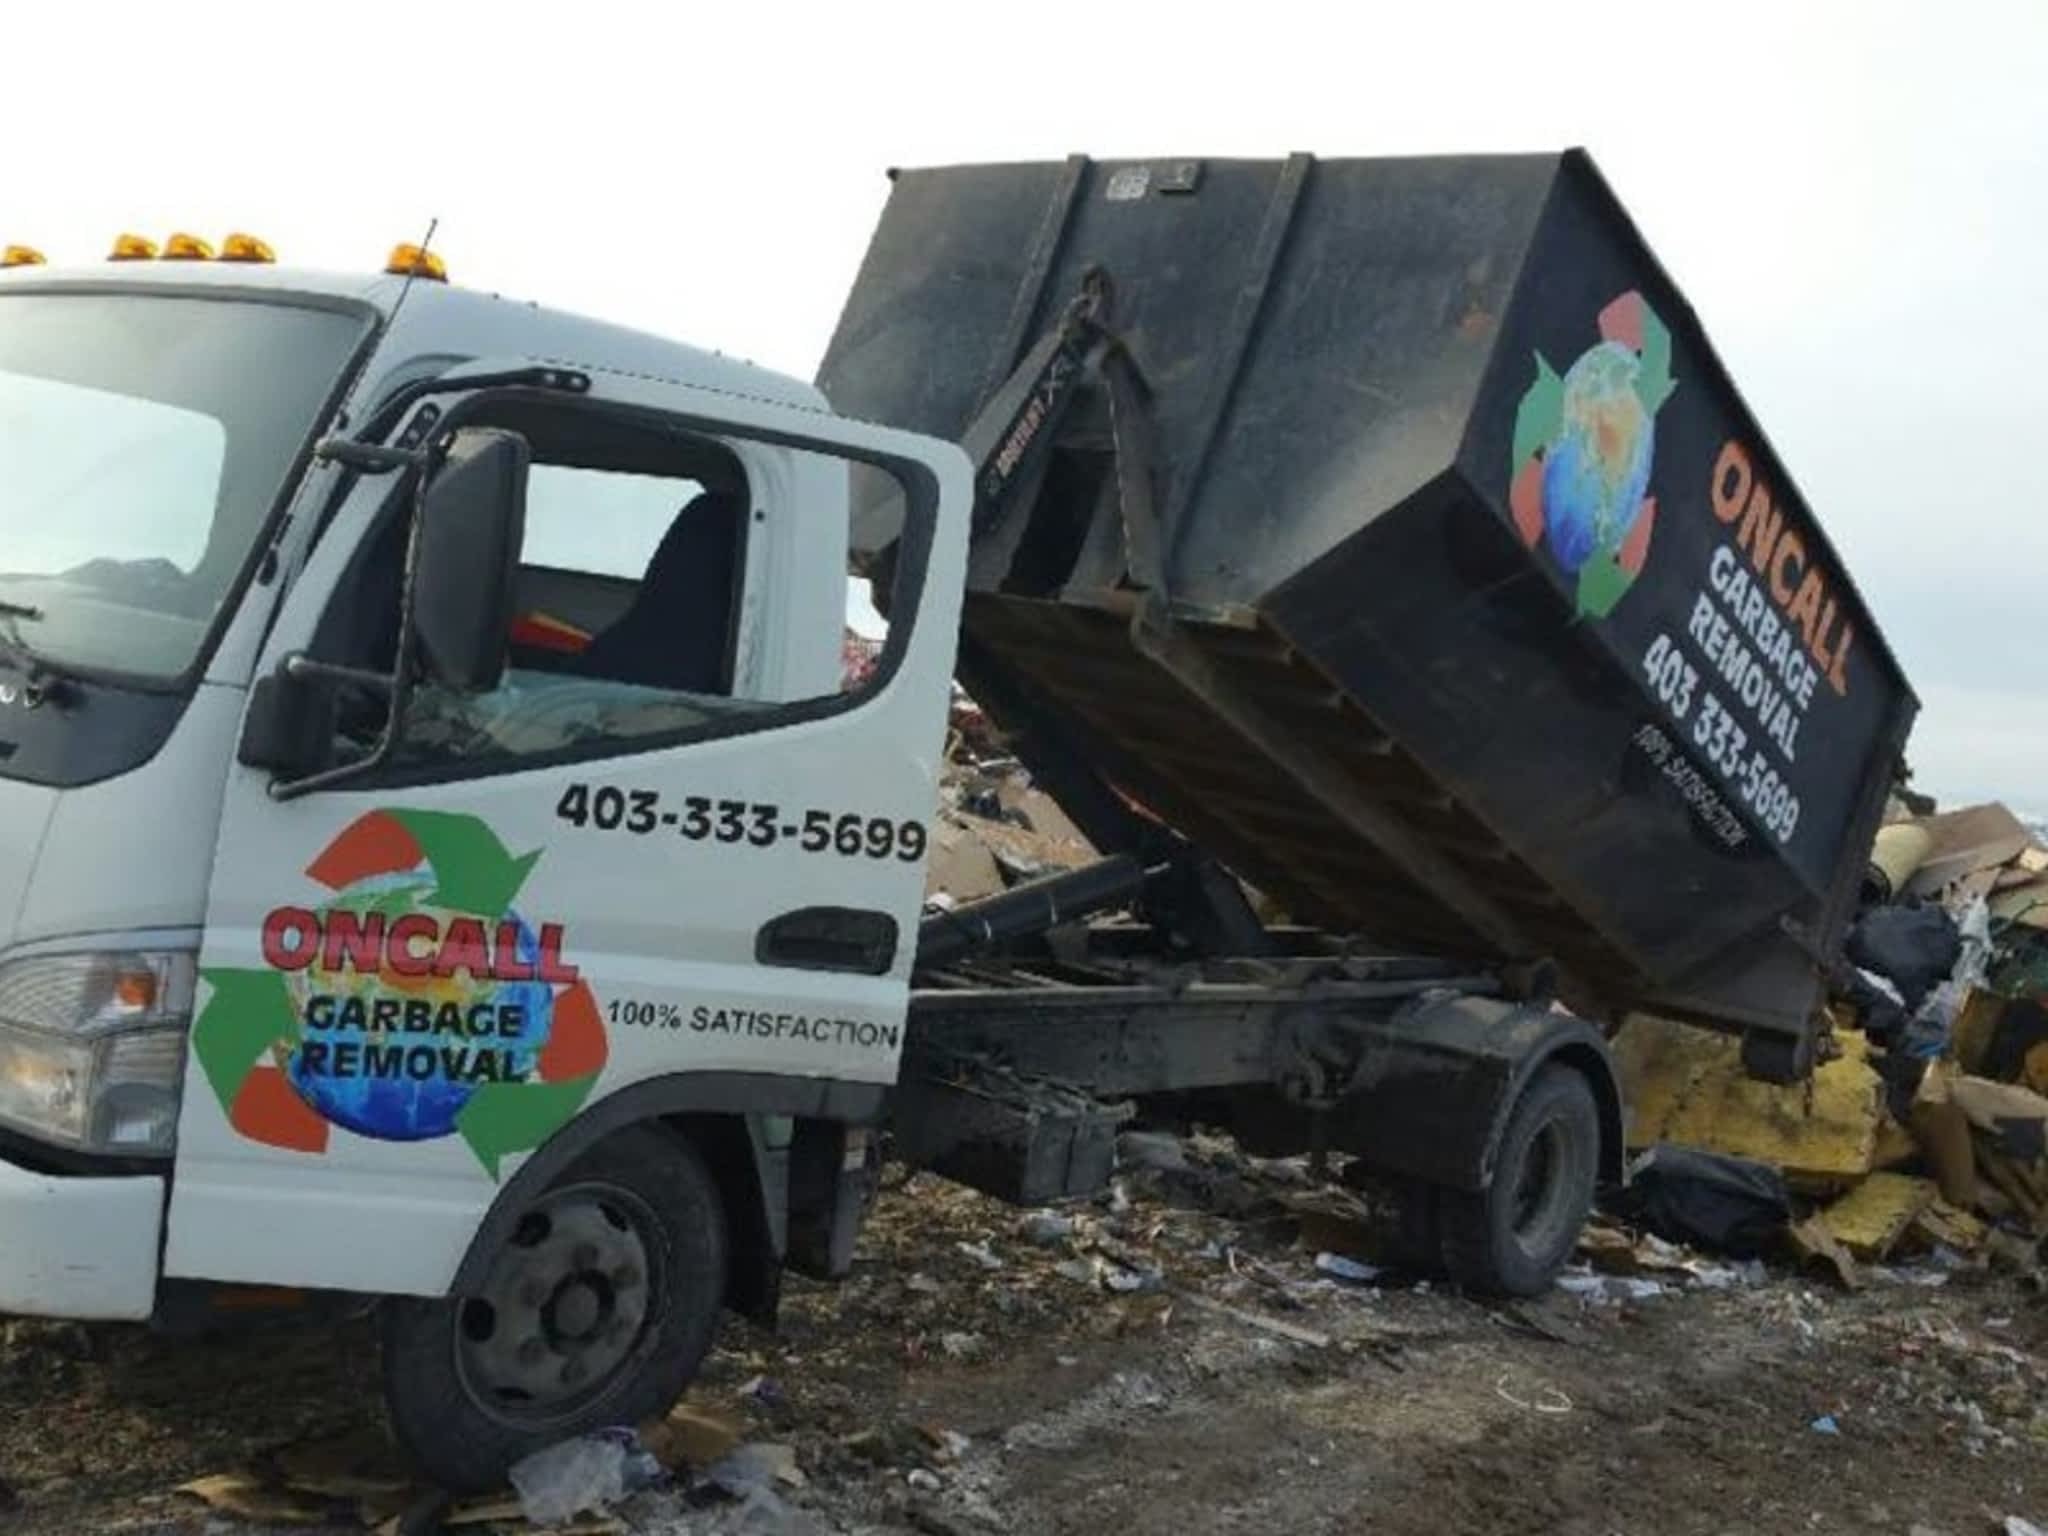 photo ONCALL Garbage Removal Ltd